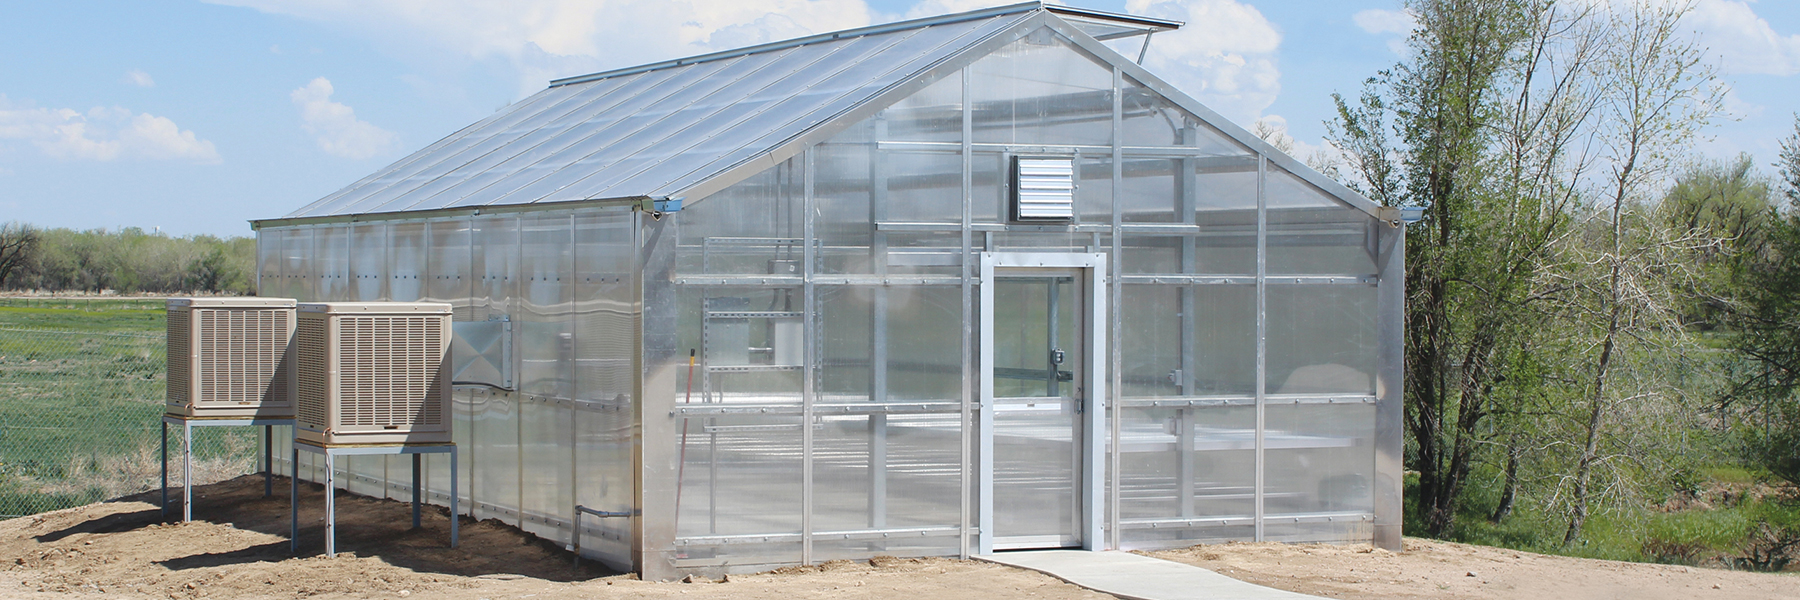 commercial cannabis greenhouse